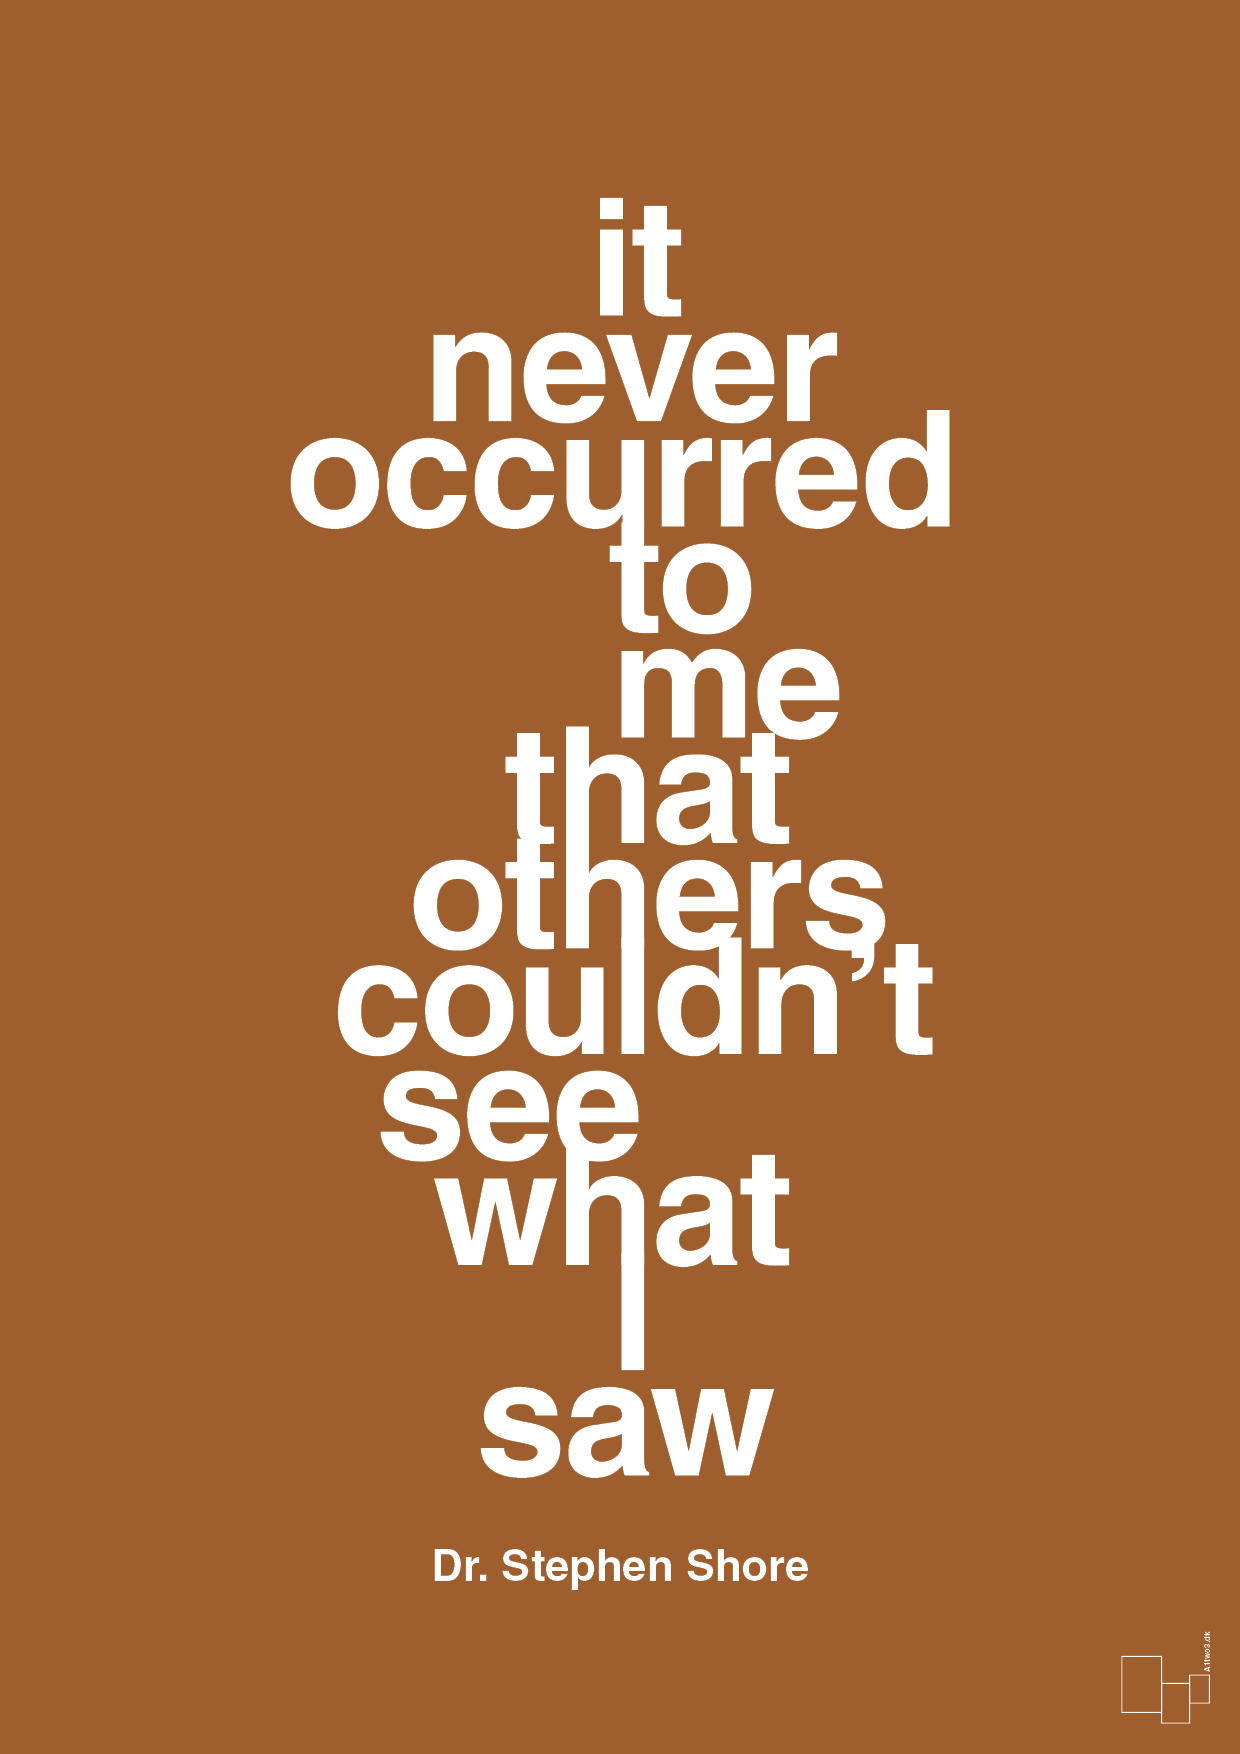 it never occurred to me that others couldn’t see what I saw - Plakat med Samfund i Cognac